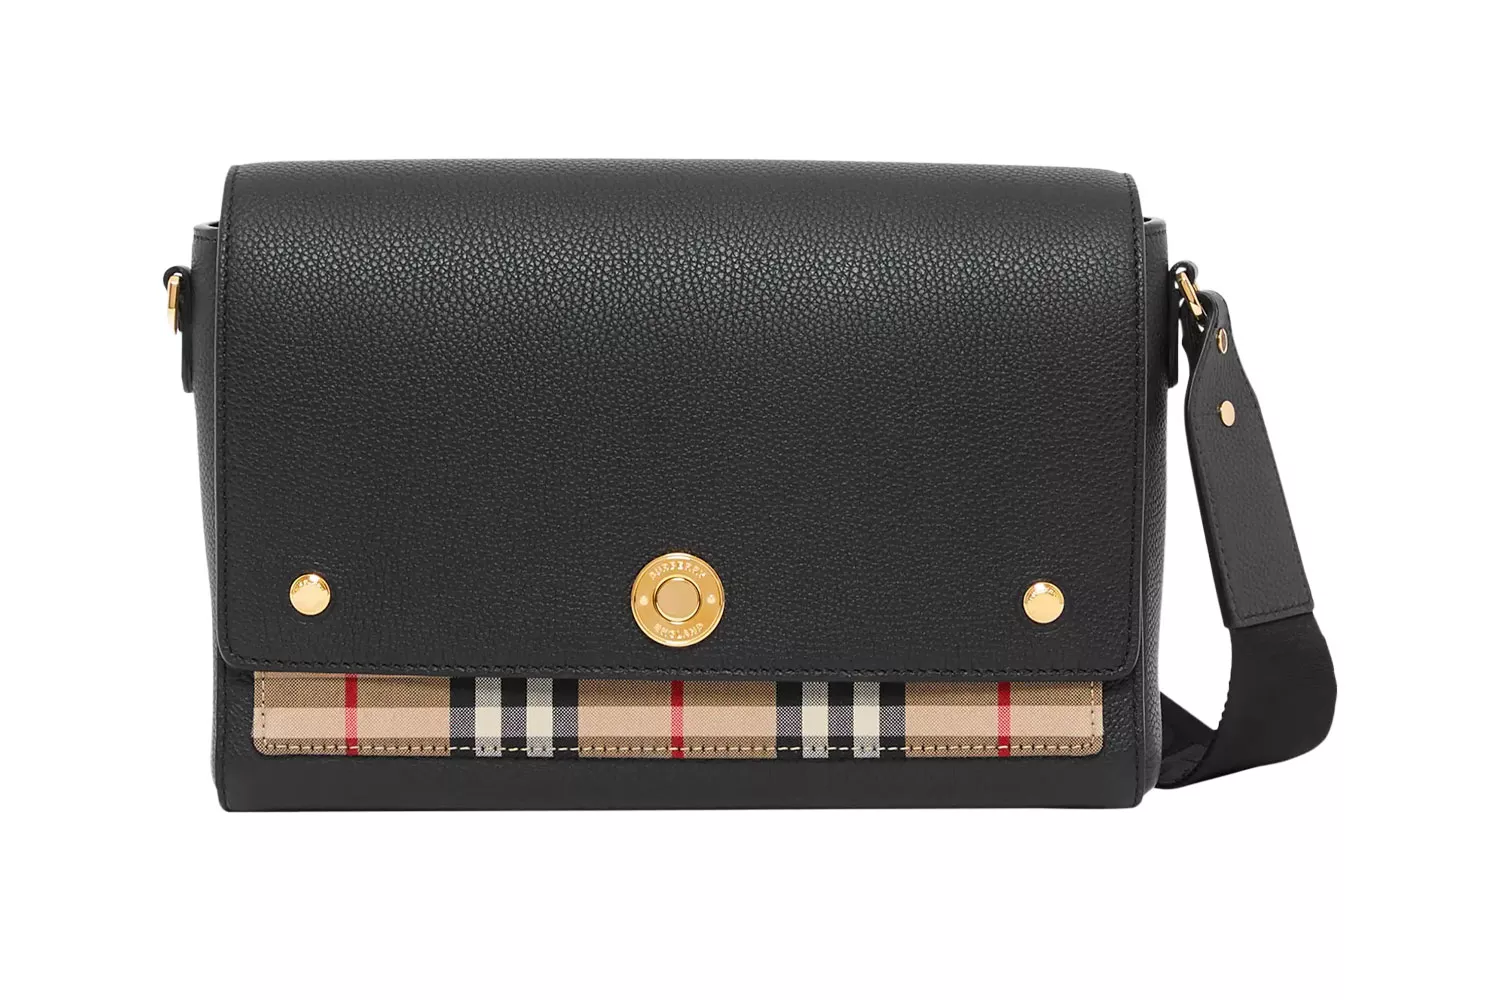 The Best Classic Crossbody Bags that Make Your Busy Days Easier: Burberry Note Leather & Vintage Check Crossbody Bag